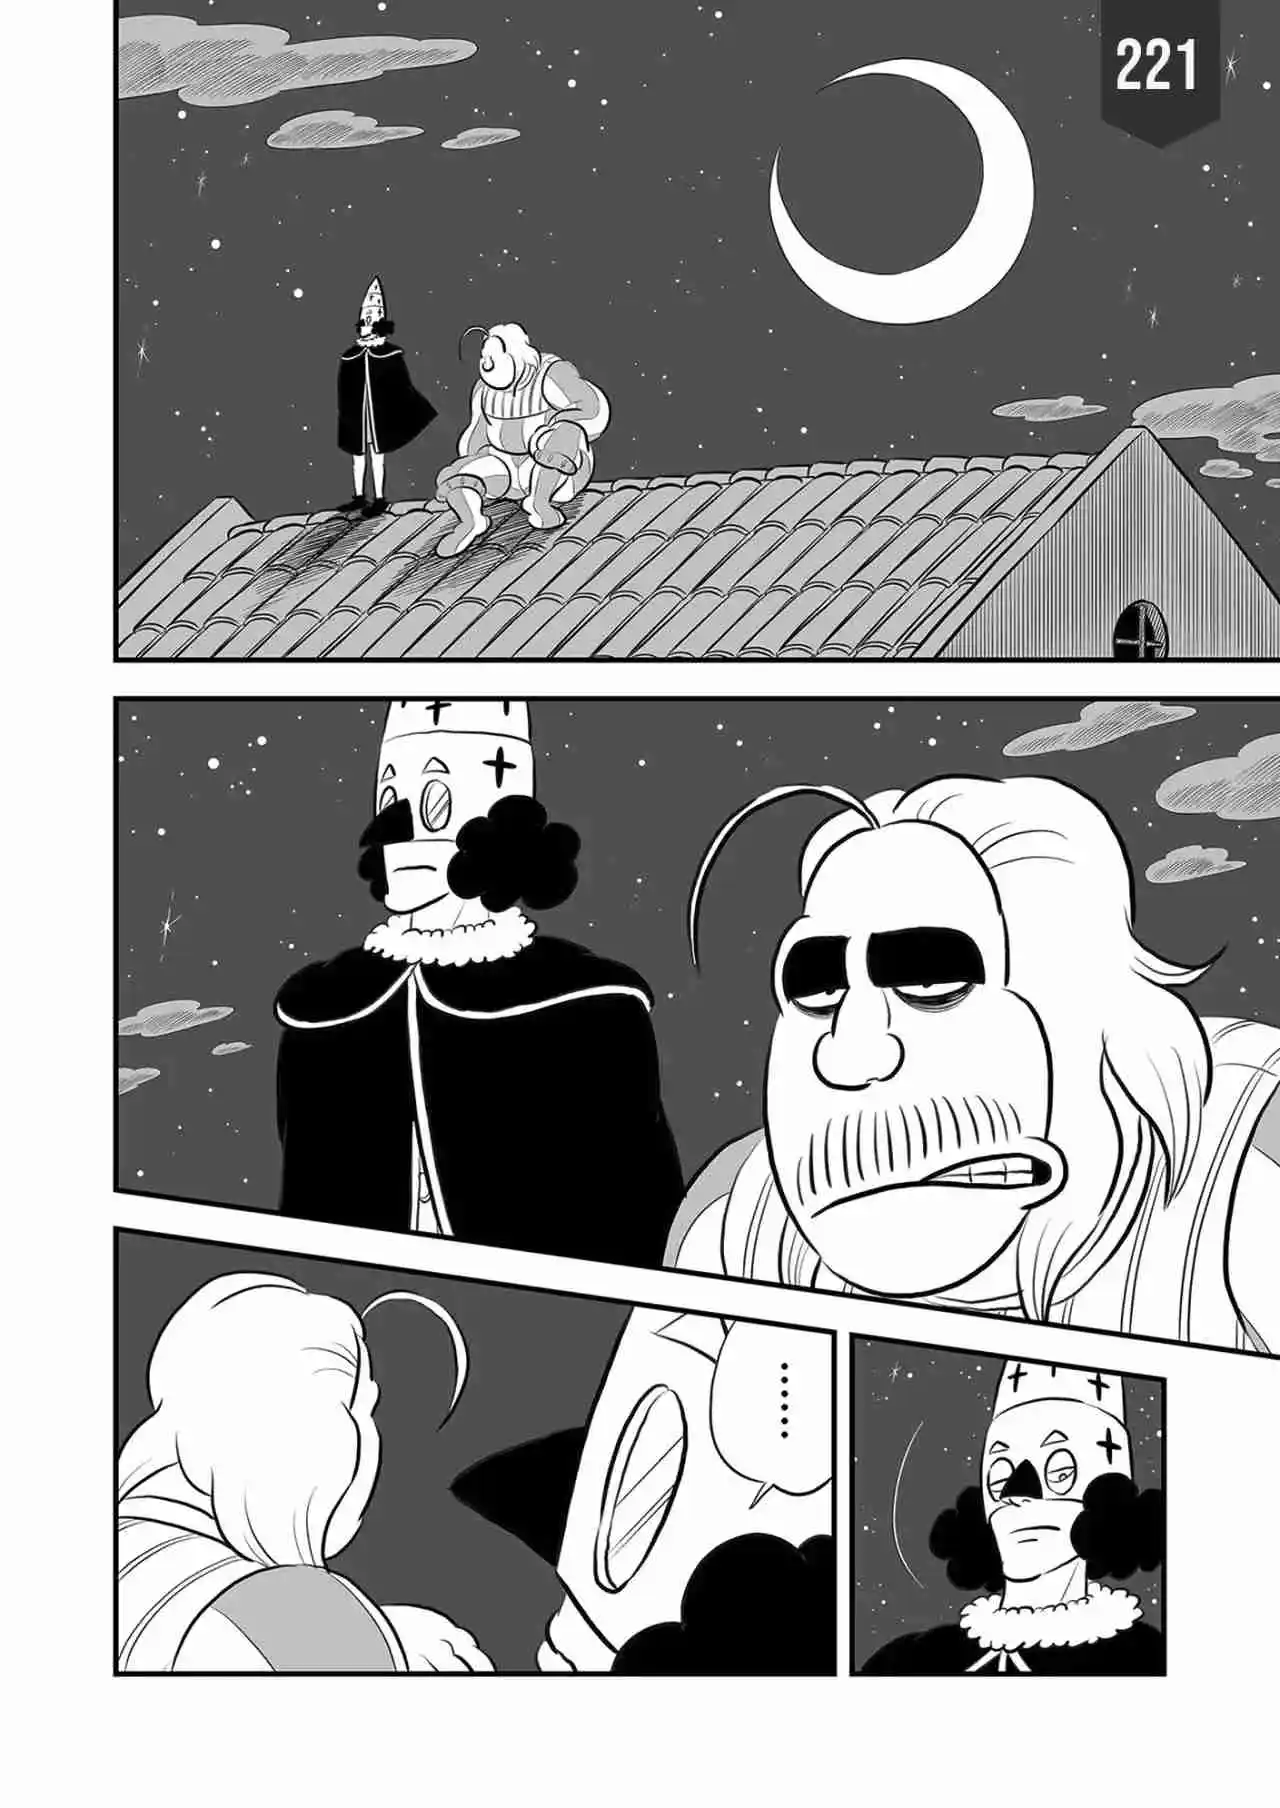 Clasificacion De Reyes: Chapter 221 - Page 1